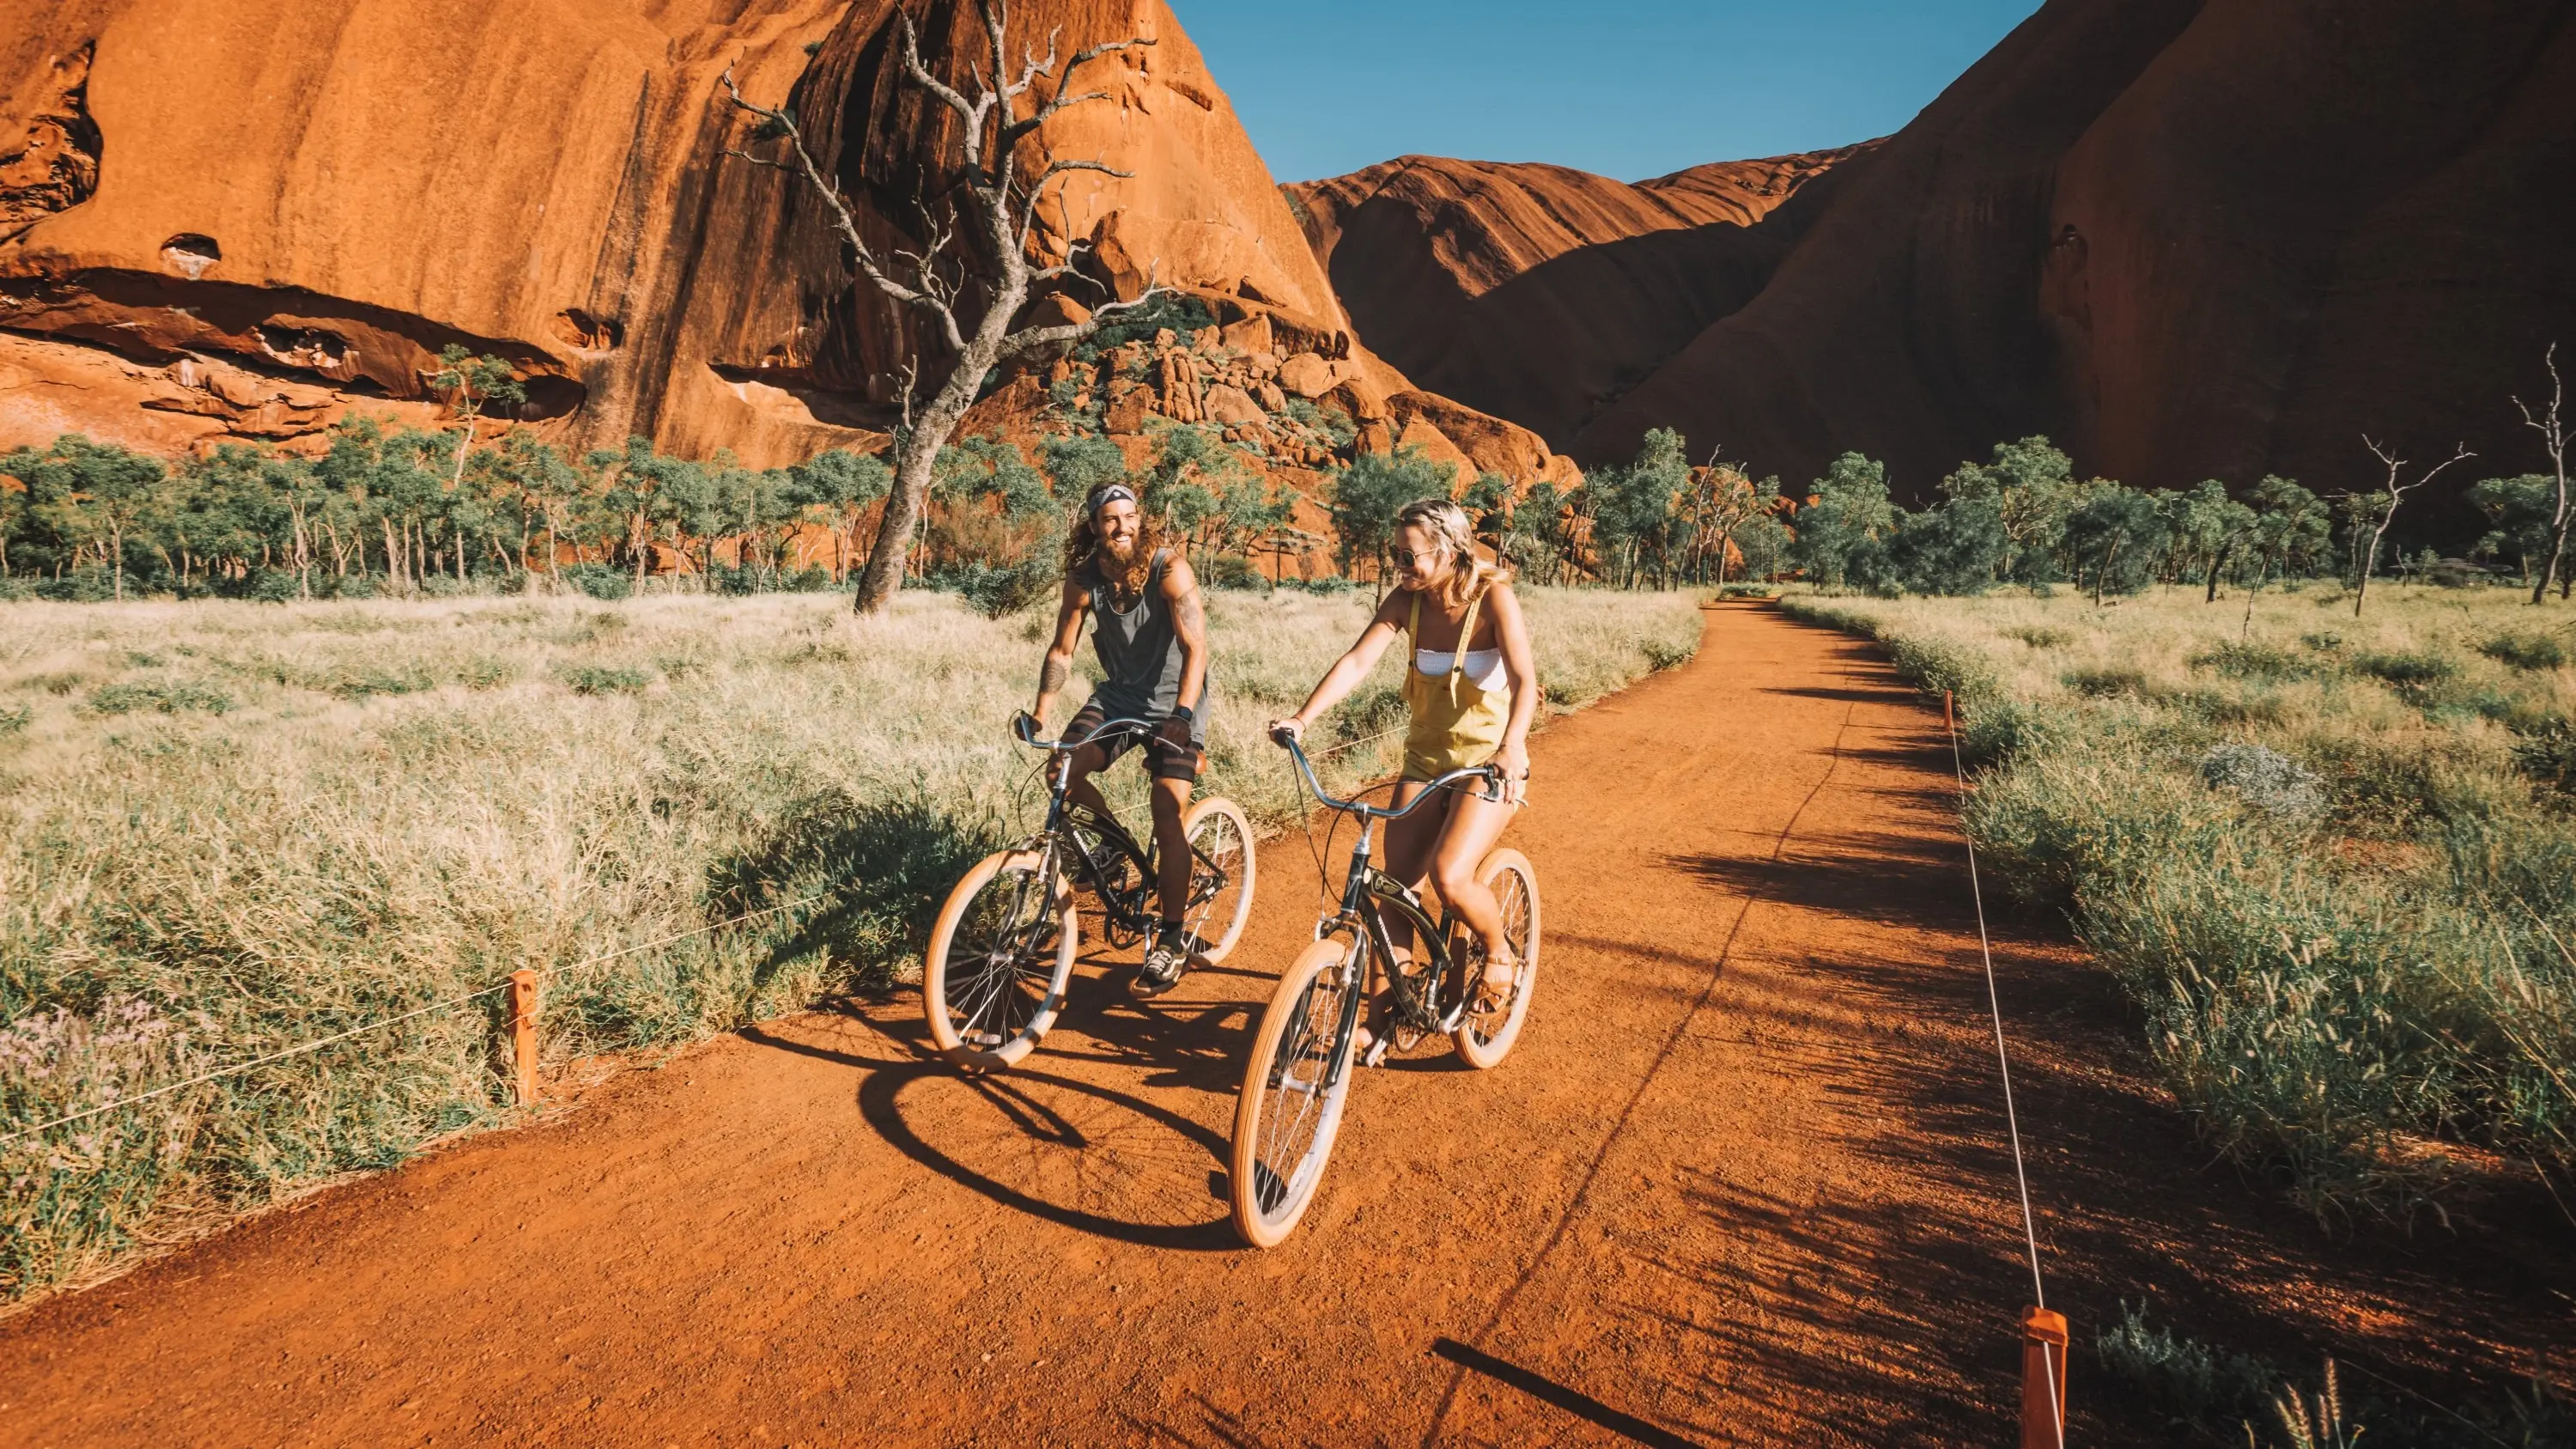 Two people riding bikes on the base track of Uluru. Image credit: Tourism NT/Laura Bell